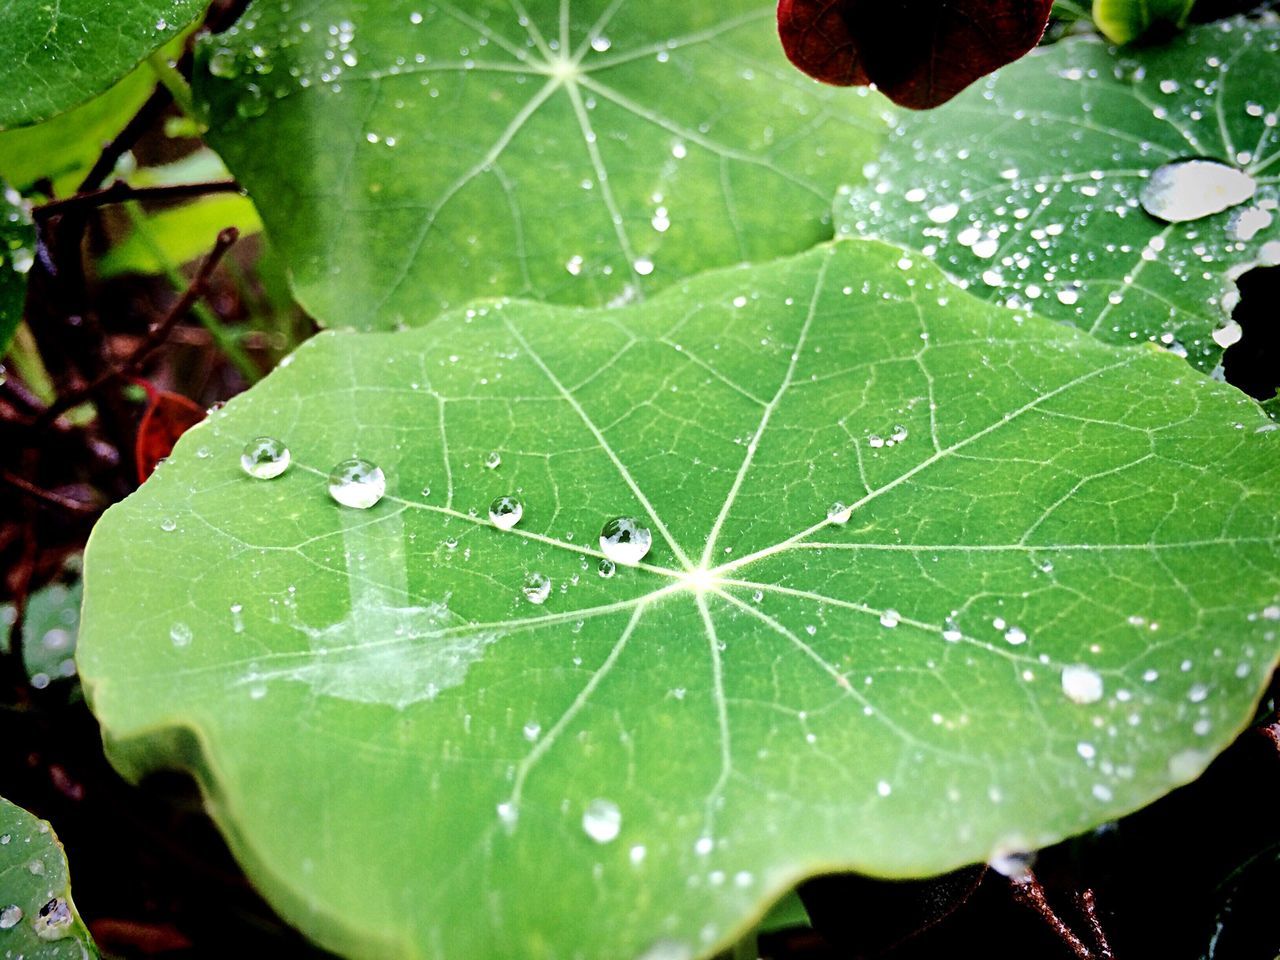 leaf, drop, water, leaf vein, wet, close-up, green color, dew, nature, growth, freshness, focus on foreground, fragility, plant, beauty in nature, natural pattern, raindrop, day, outdoors, no people